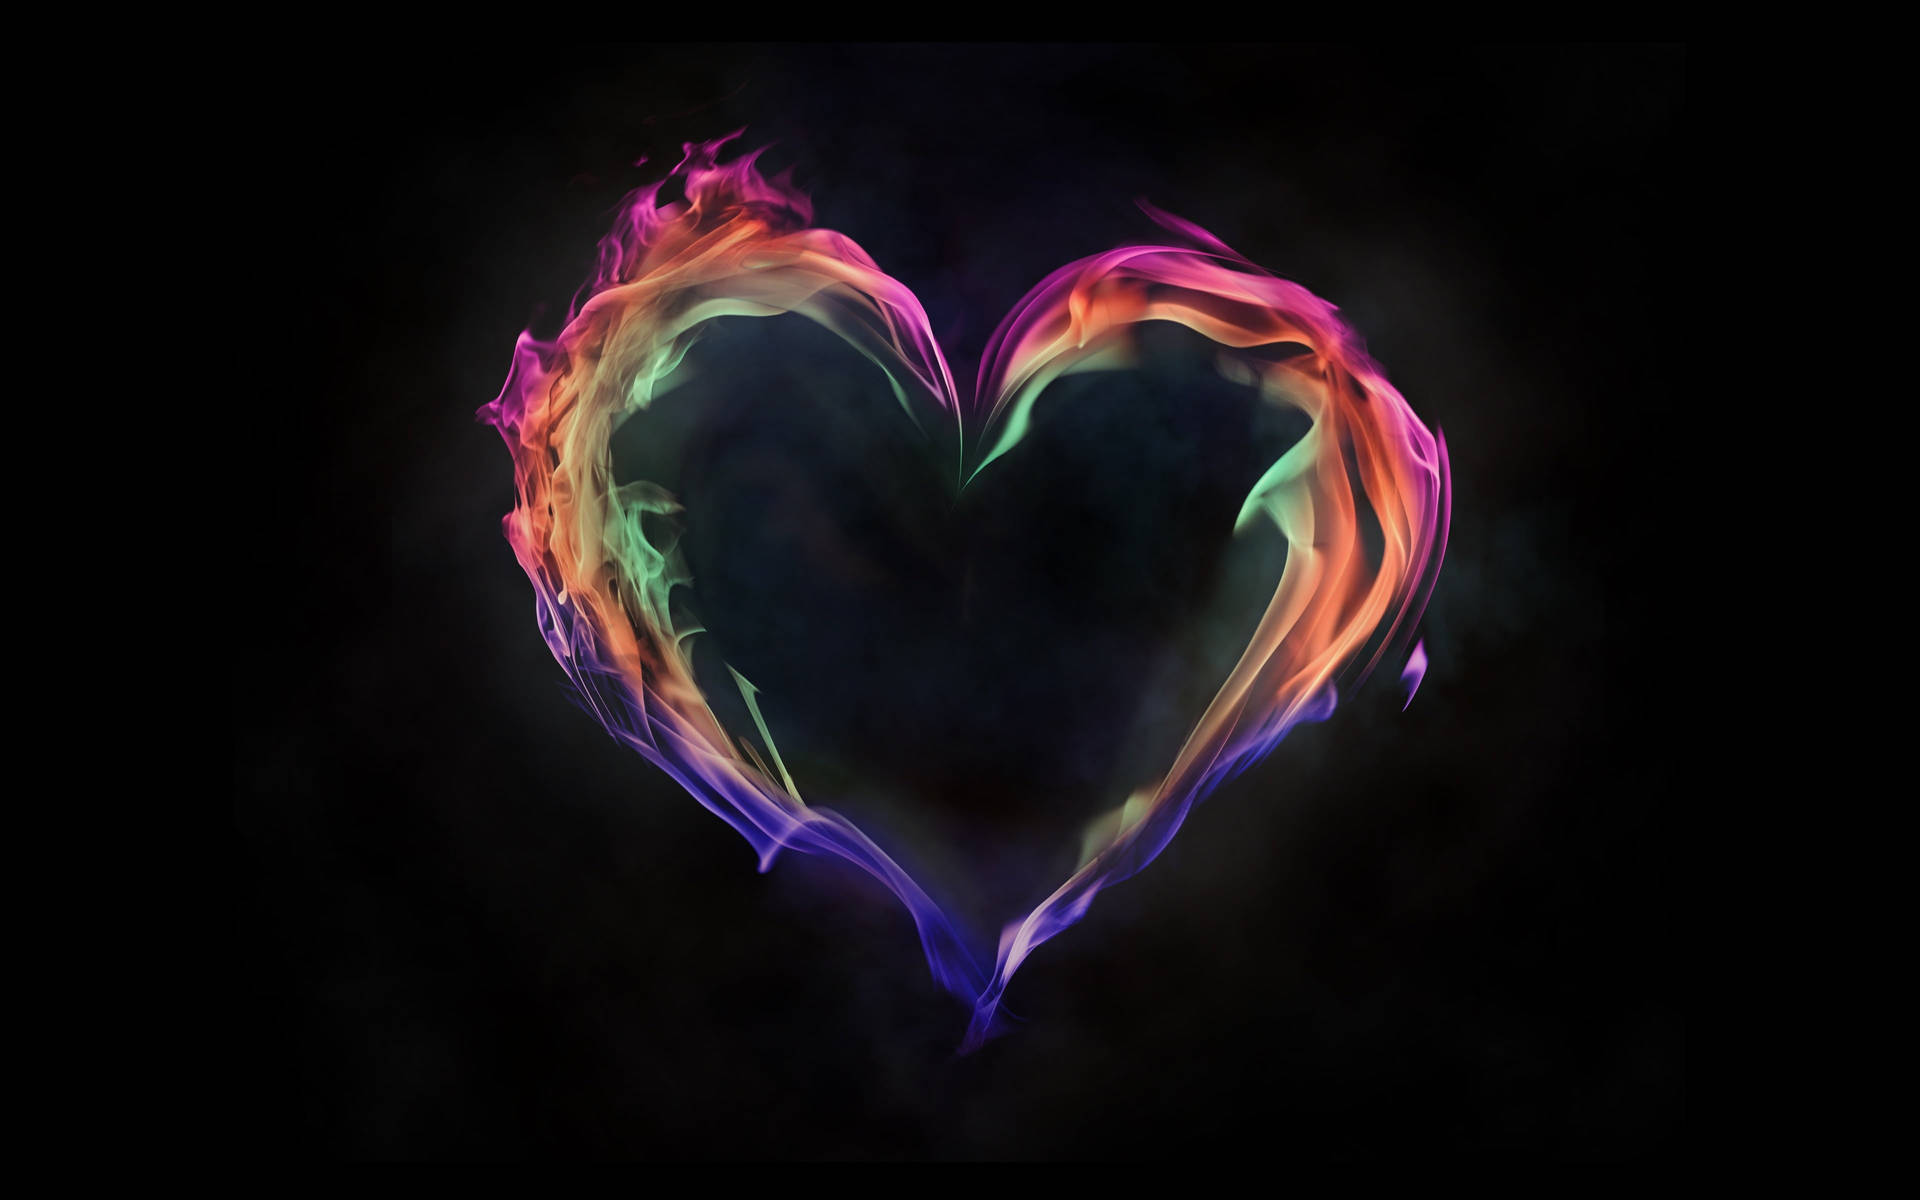 Creative Colorful Flaming Heart Background